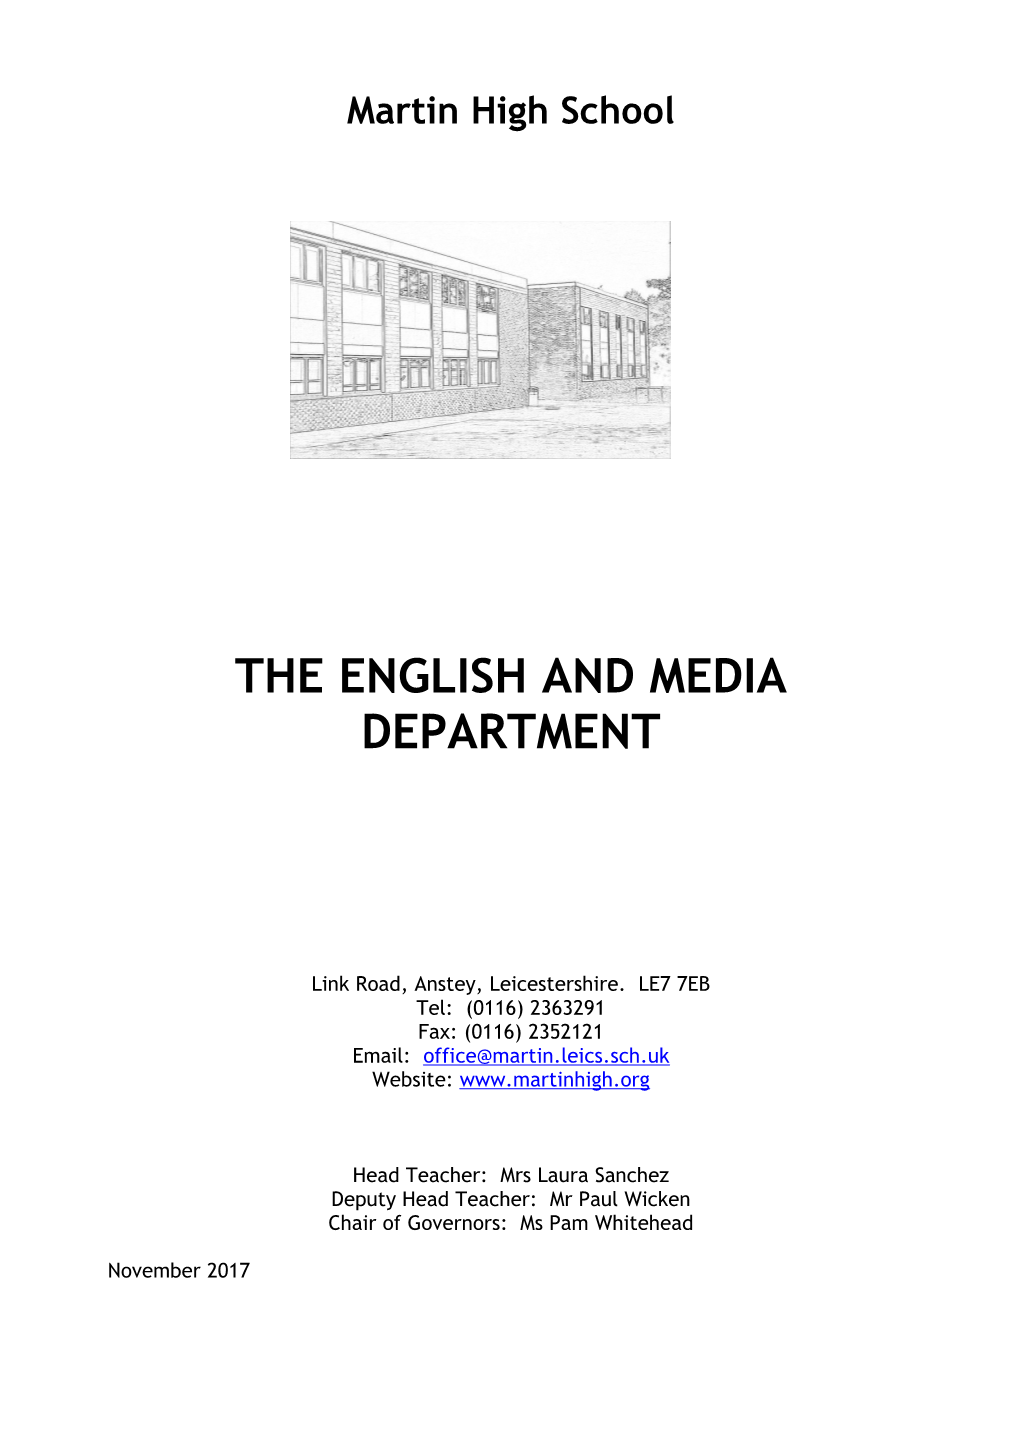 The English and Media Department